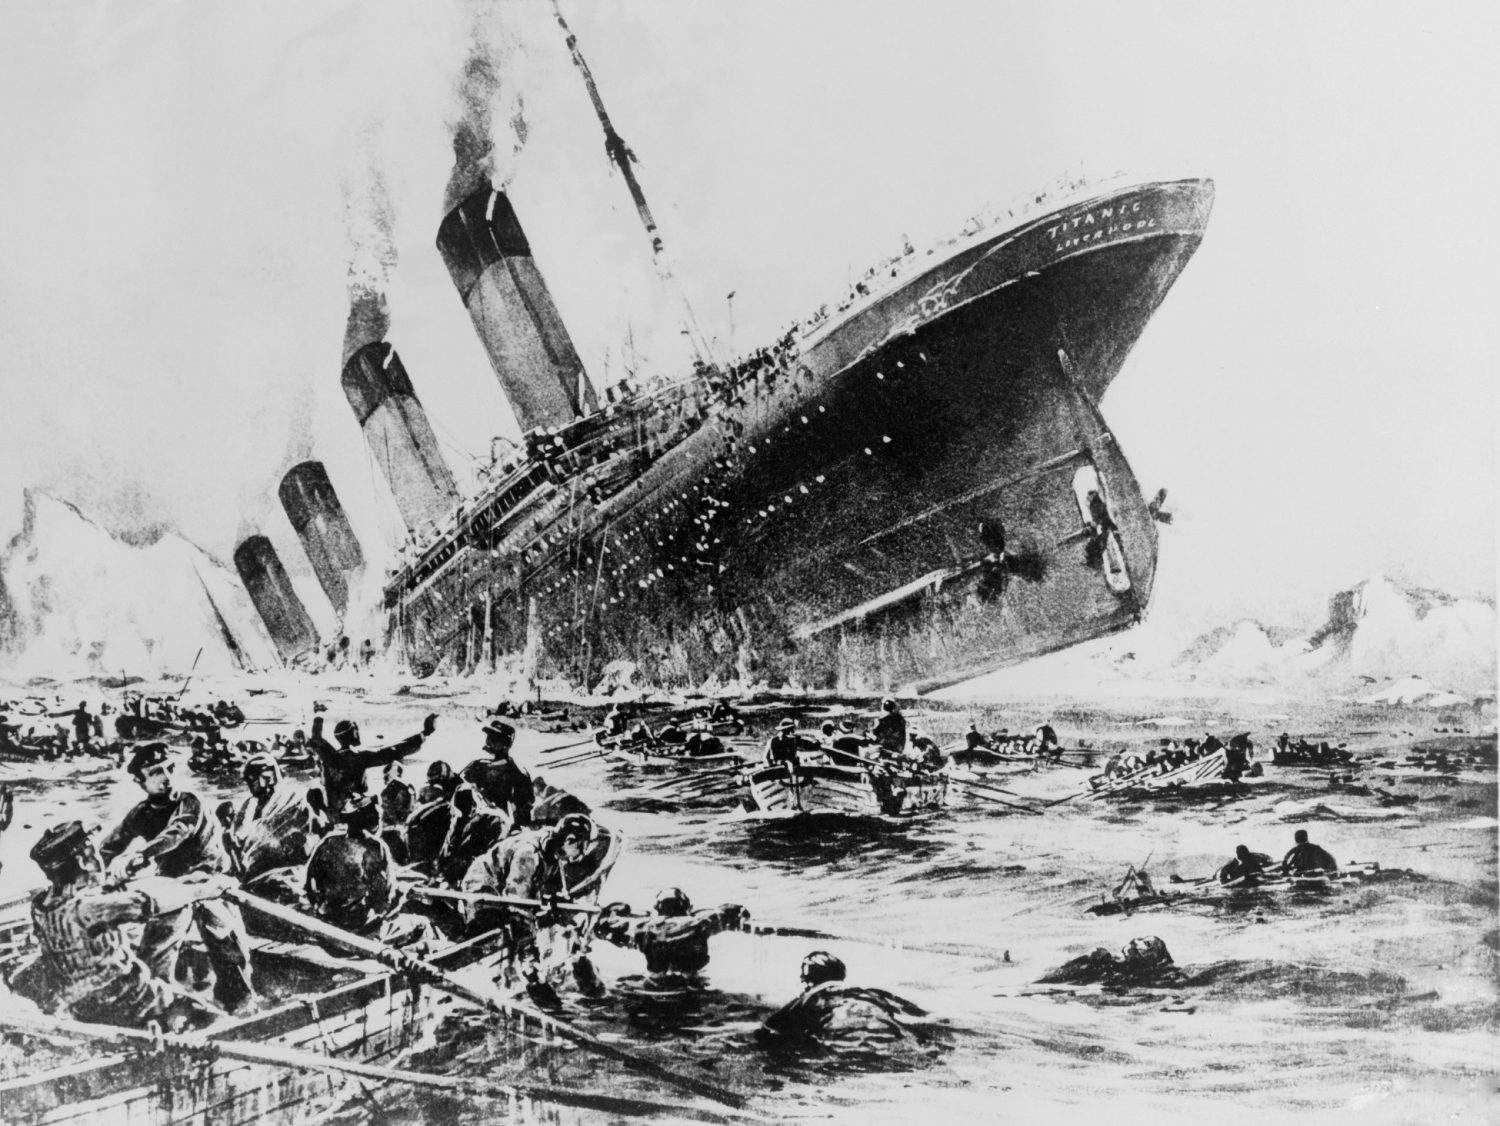 Reflections On The Root Causes Of The Titanic Disaster 14 15th April 1912 International Masters Program For Managers